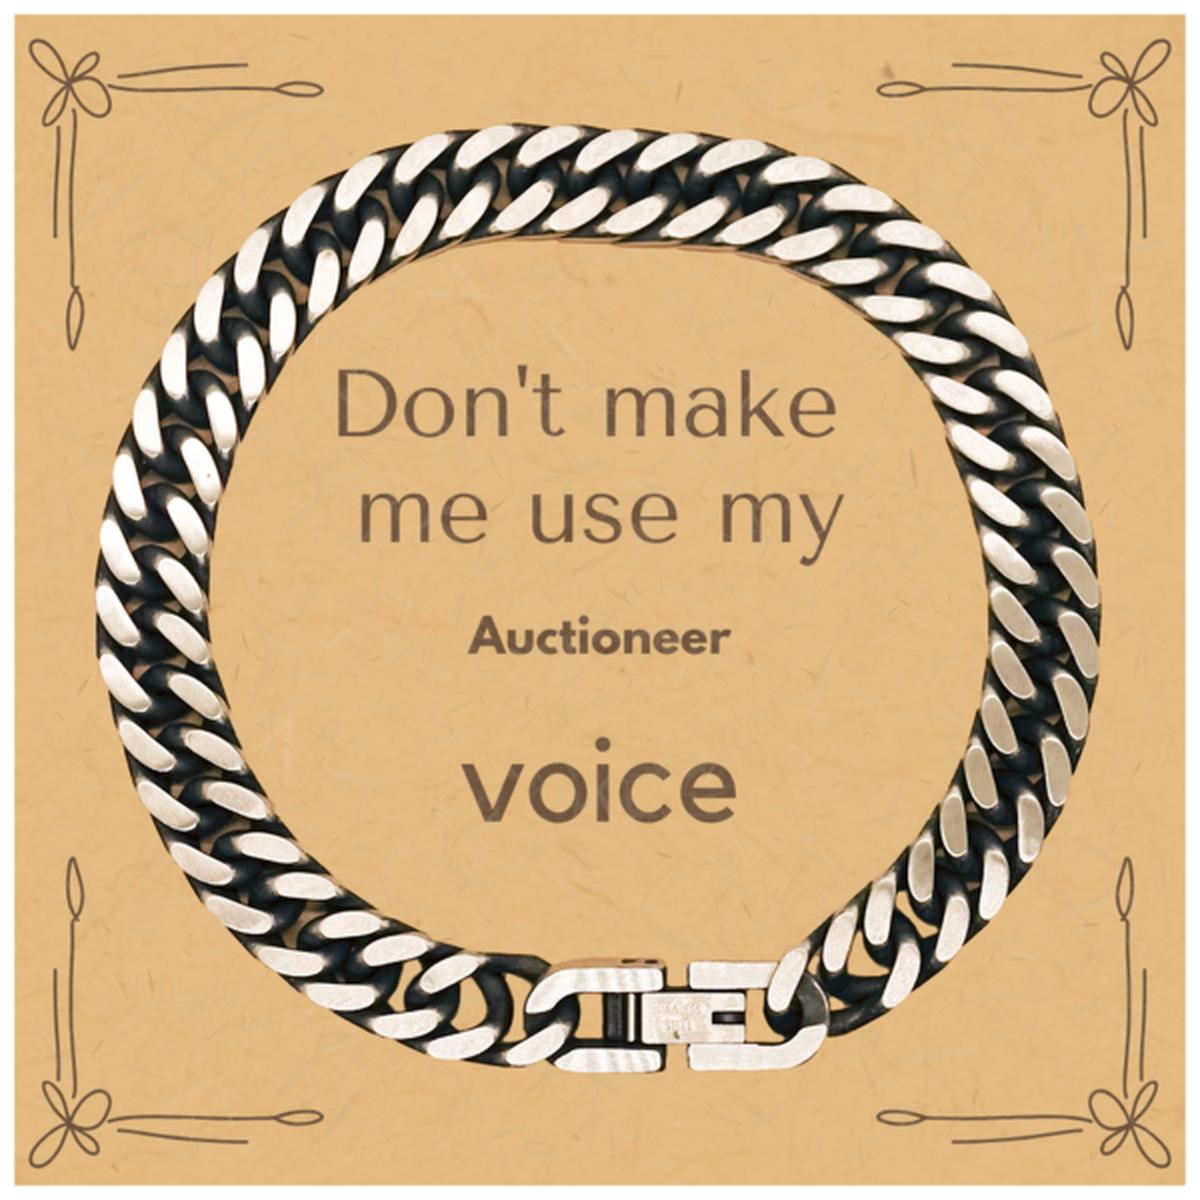 Don't make me use my Auctioneer voice, Sarcasm Auctioneer Card Gifts, Christmas Auctioneer Cuban Link Chain Bracelet Birthday Unique Gifts For Auctioneer Coworkers, Men, Women, Colleague, Friends